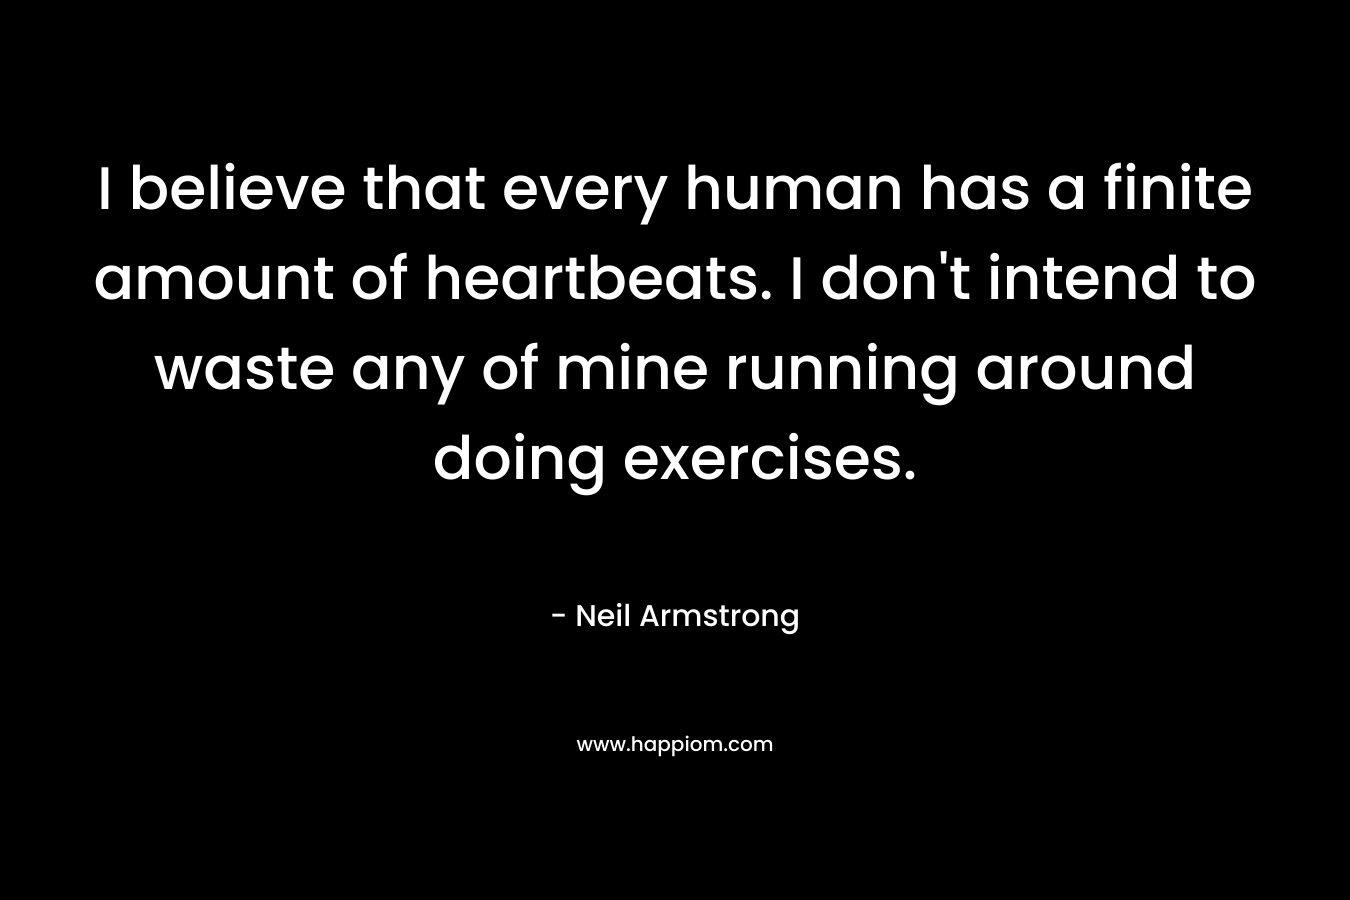 I believe that every human has a finite amount of heartbeats. I don't intend to waste any of mine running around doing exercises.